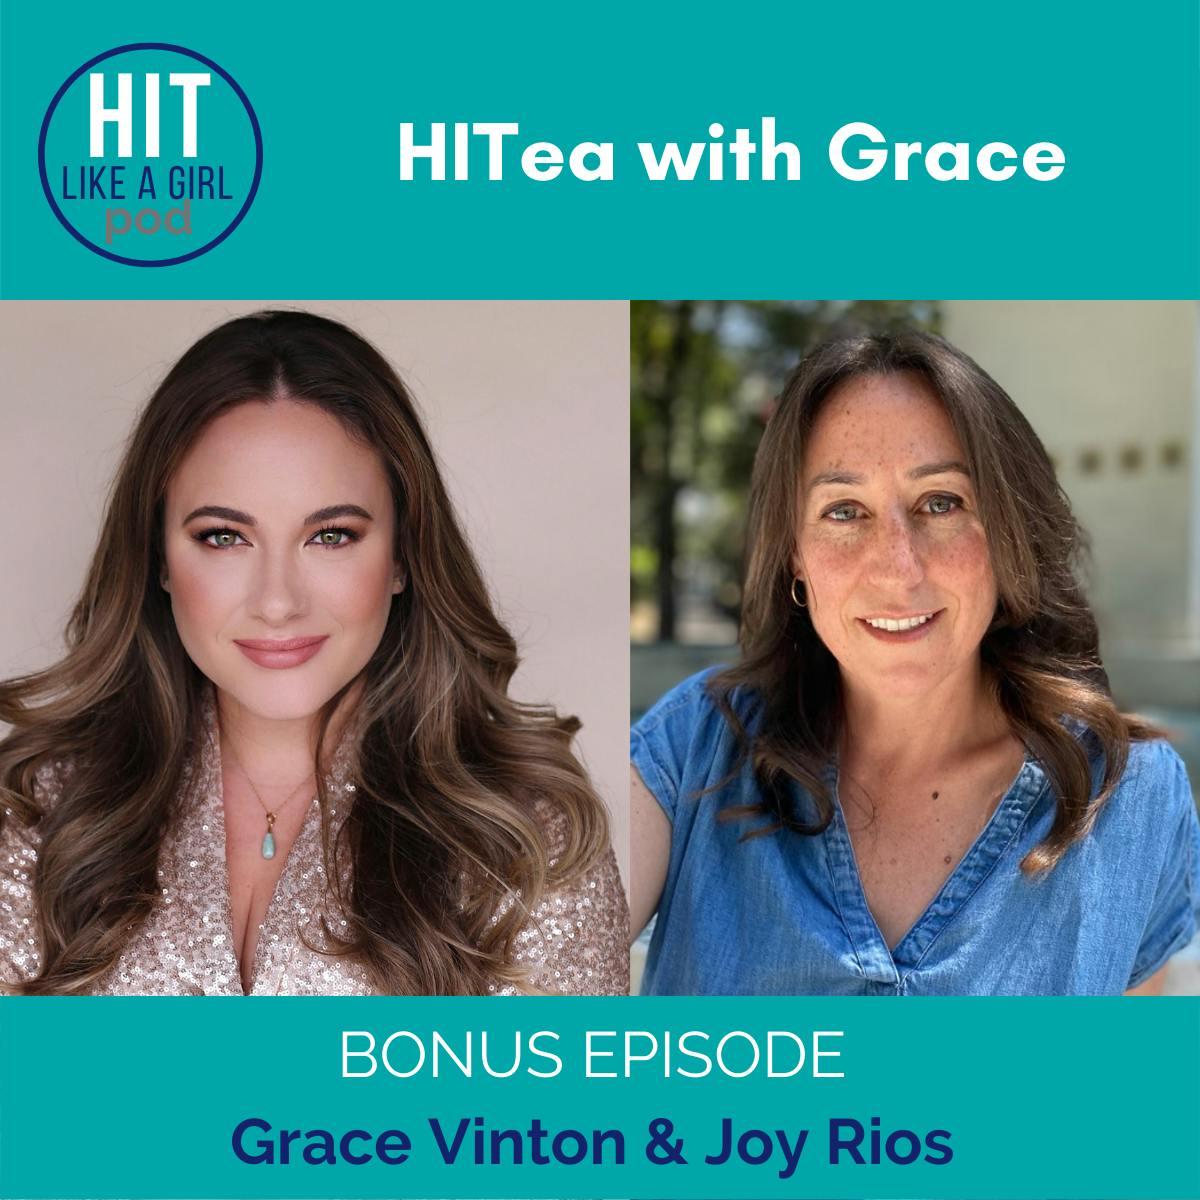 HITea with Grace: Joy Rios Turned a Complaint into an Opportunity